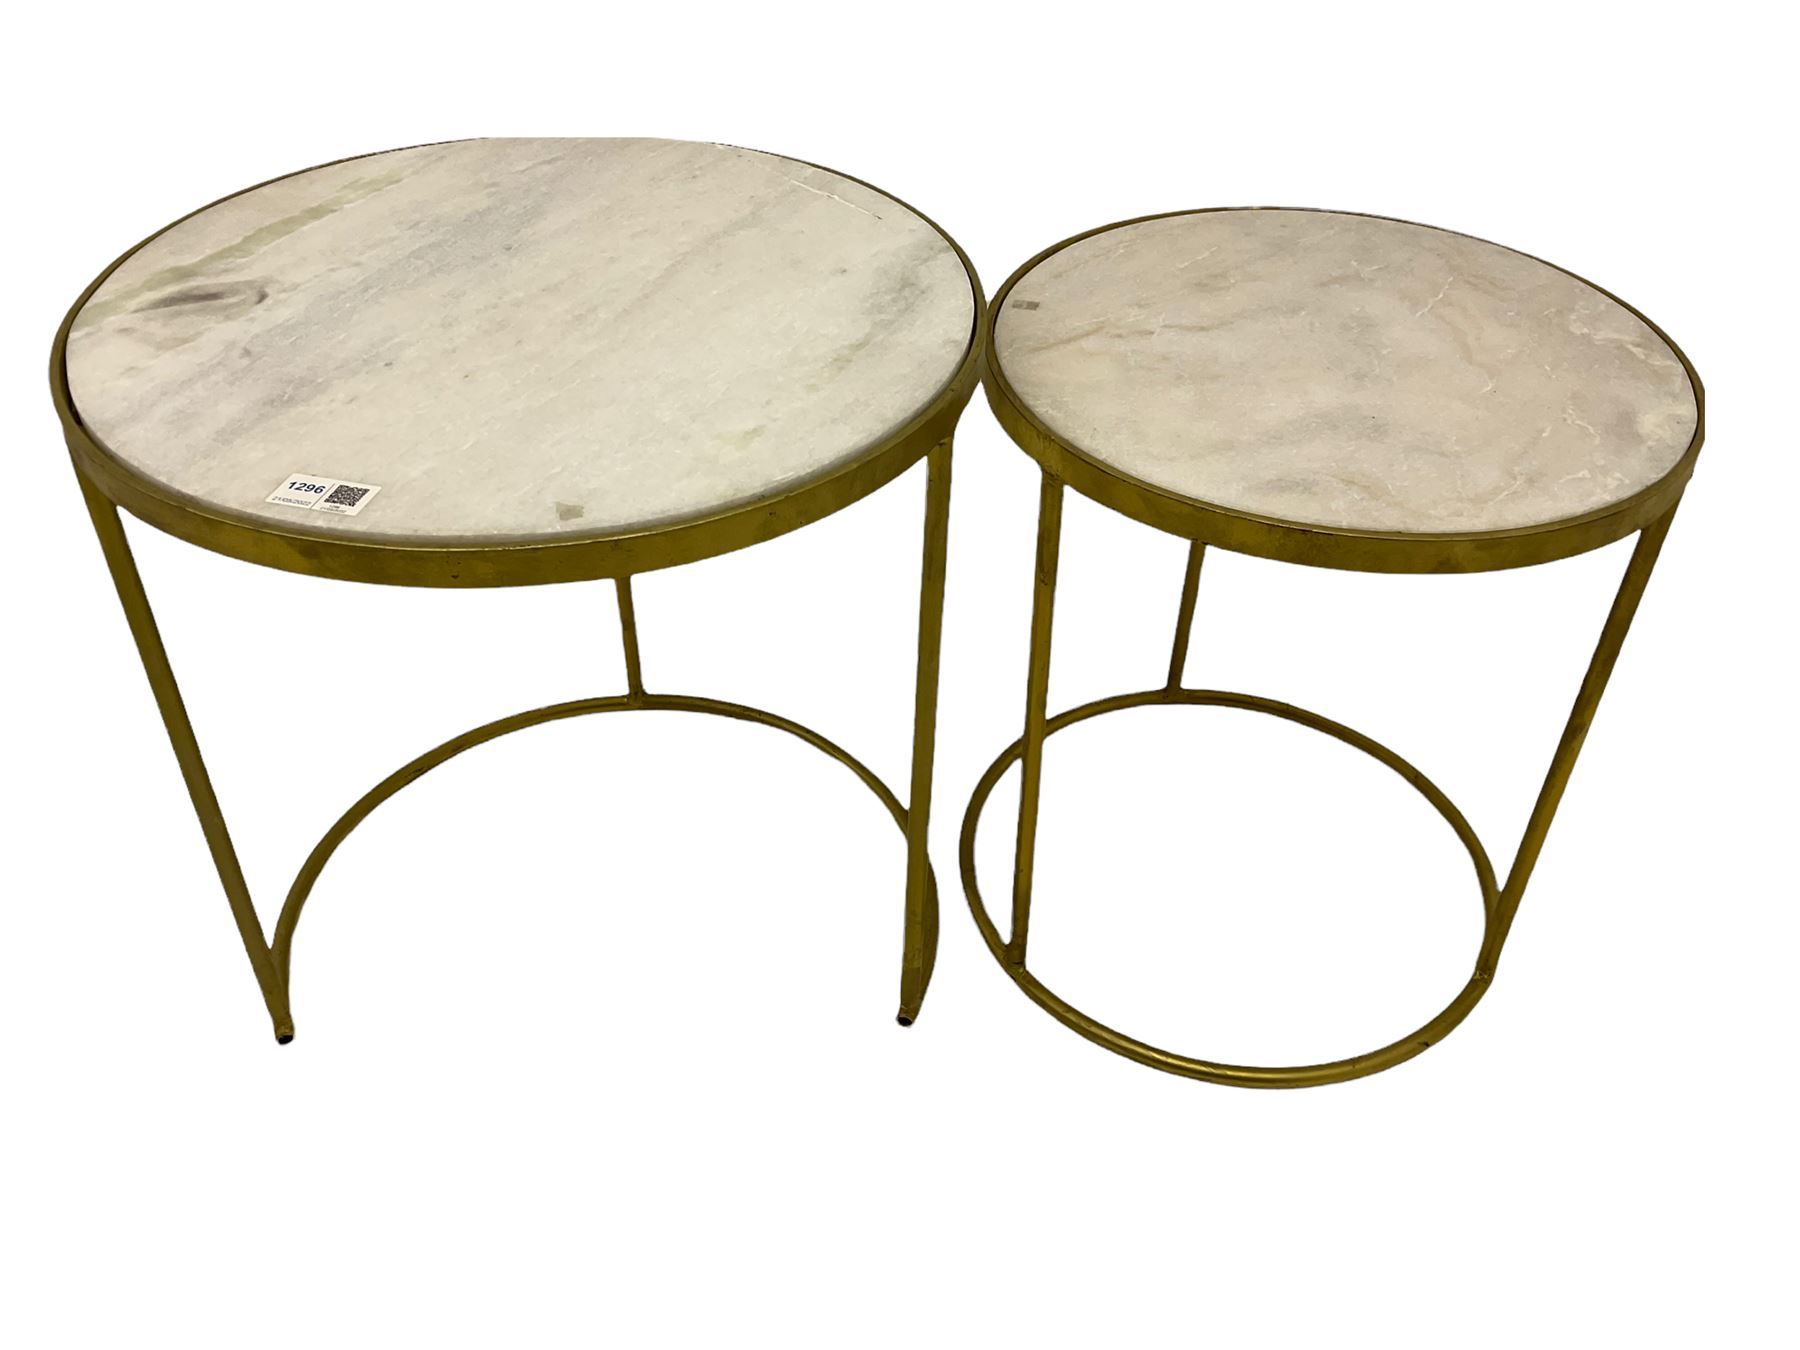 Two contemporary nesting side tables - Image 3 of 3